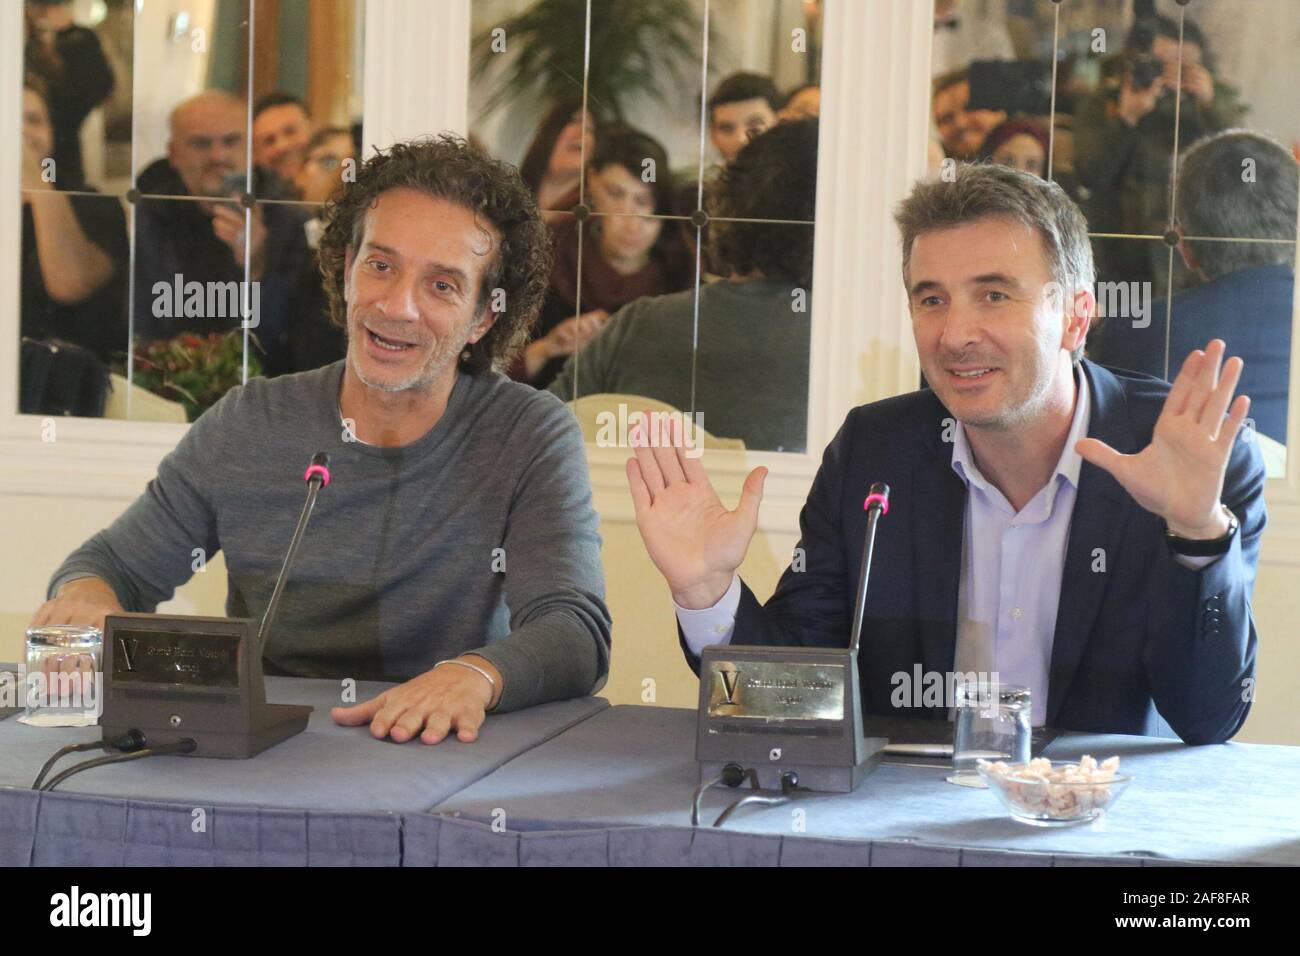 Napoli, Italy. 13th Dec, 2019. Photocall in Naples with cast and production of the movie titled IL PRIMO NATALE by and duo FICARRA & PICONE also Salvo Ficarra and Valentino Picone .In picture in order L to R:Salvo Ficarra, Valentino Picone, actor and director (Photo by Salvatore Esposito/Pacific Press) Credit: Pacific Press Agency/Alamy Live News Stock Photo